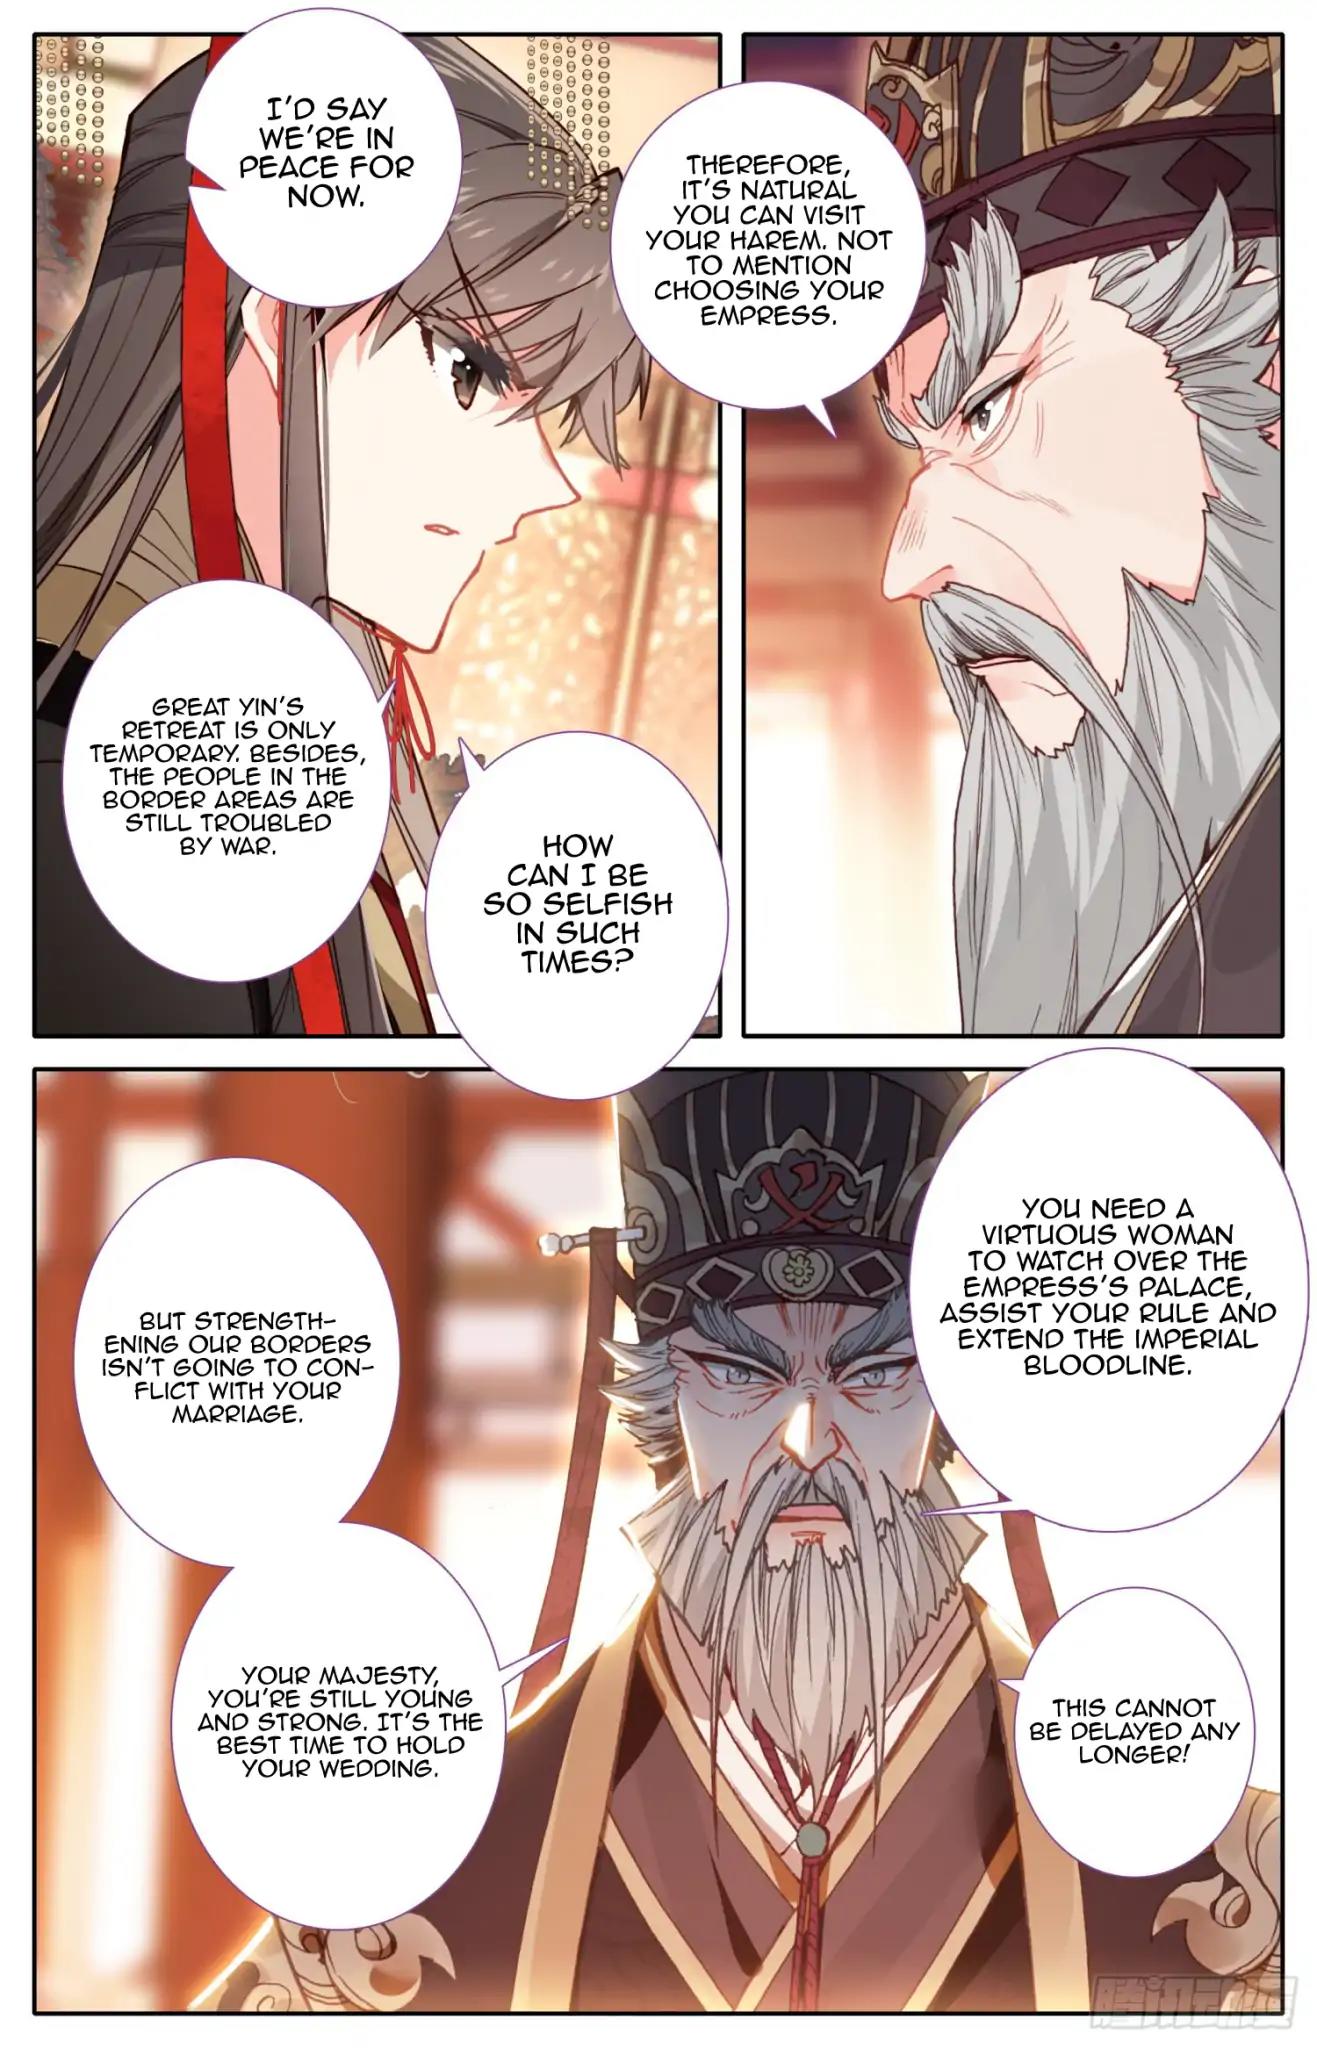 Legend of the Tyrant Empress Chapter 50: